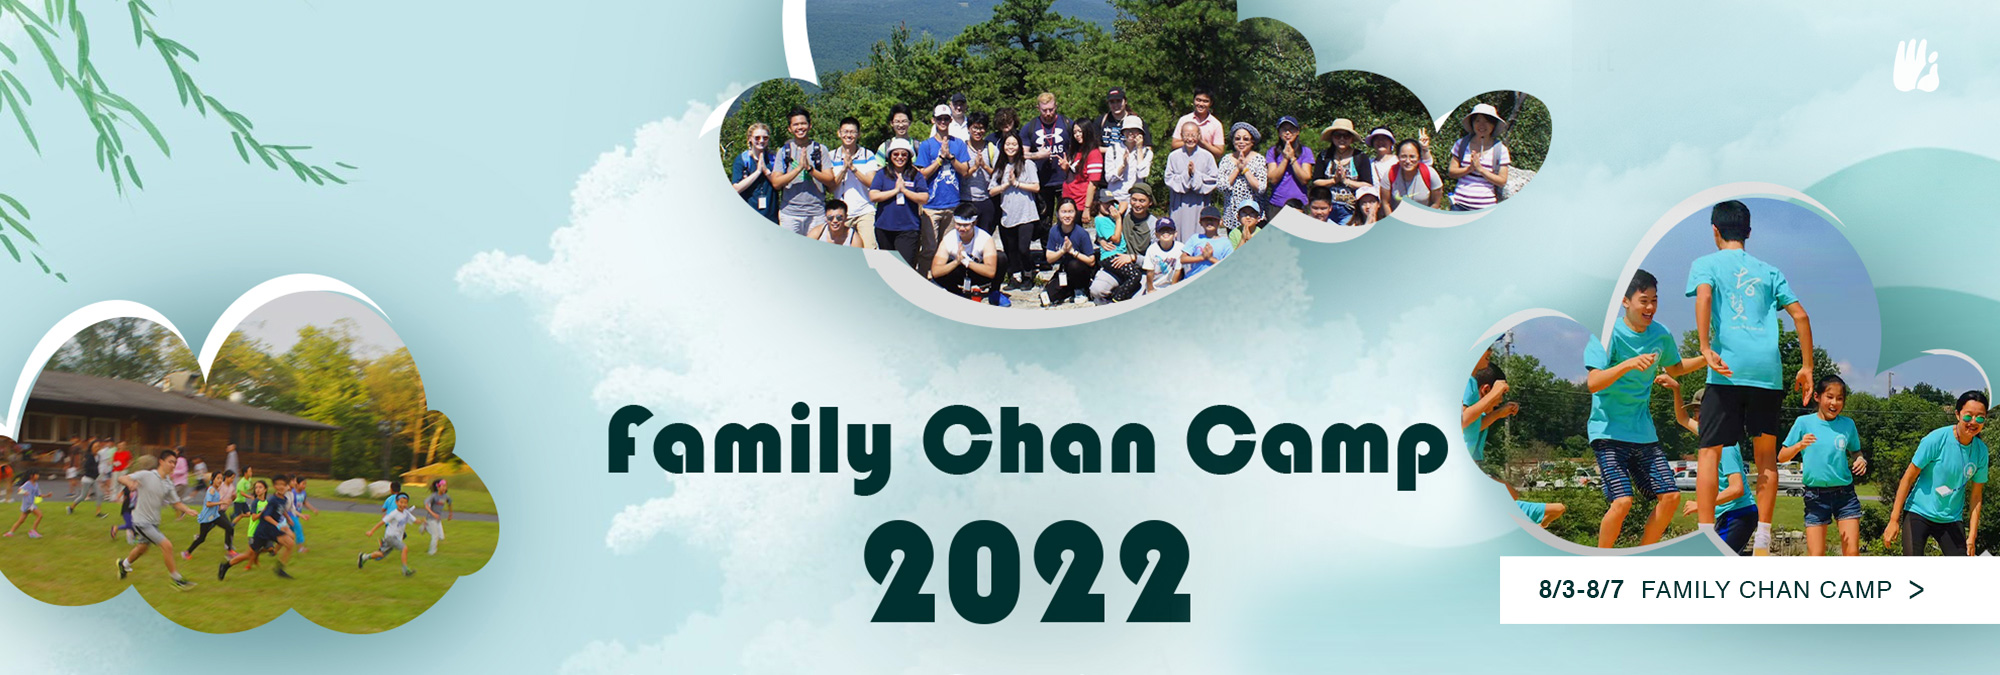 2022 Family Chan Camp